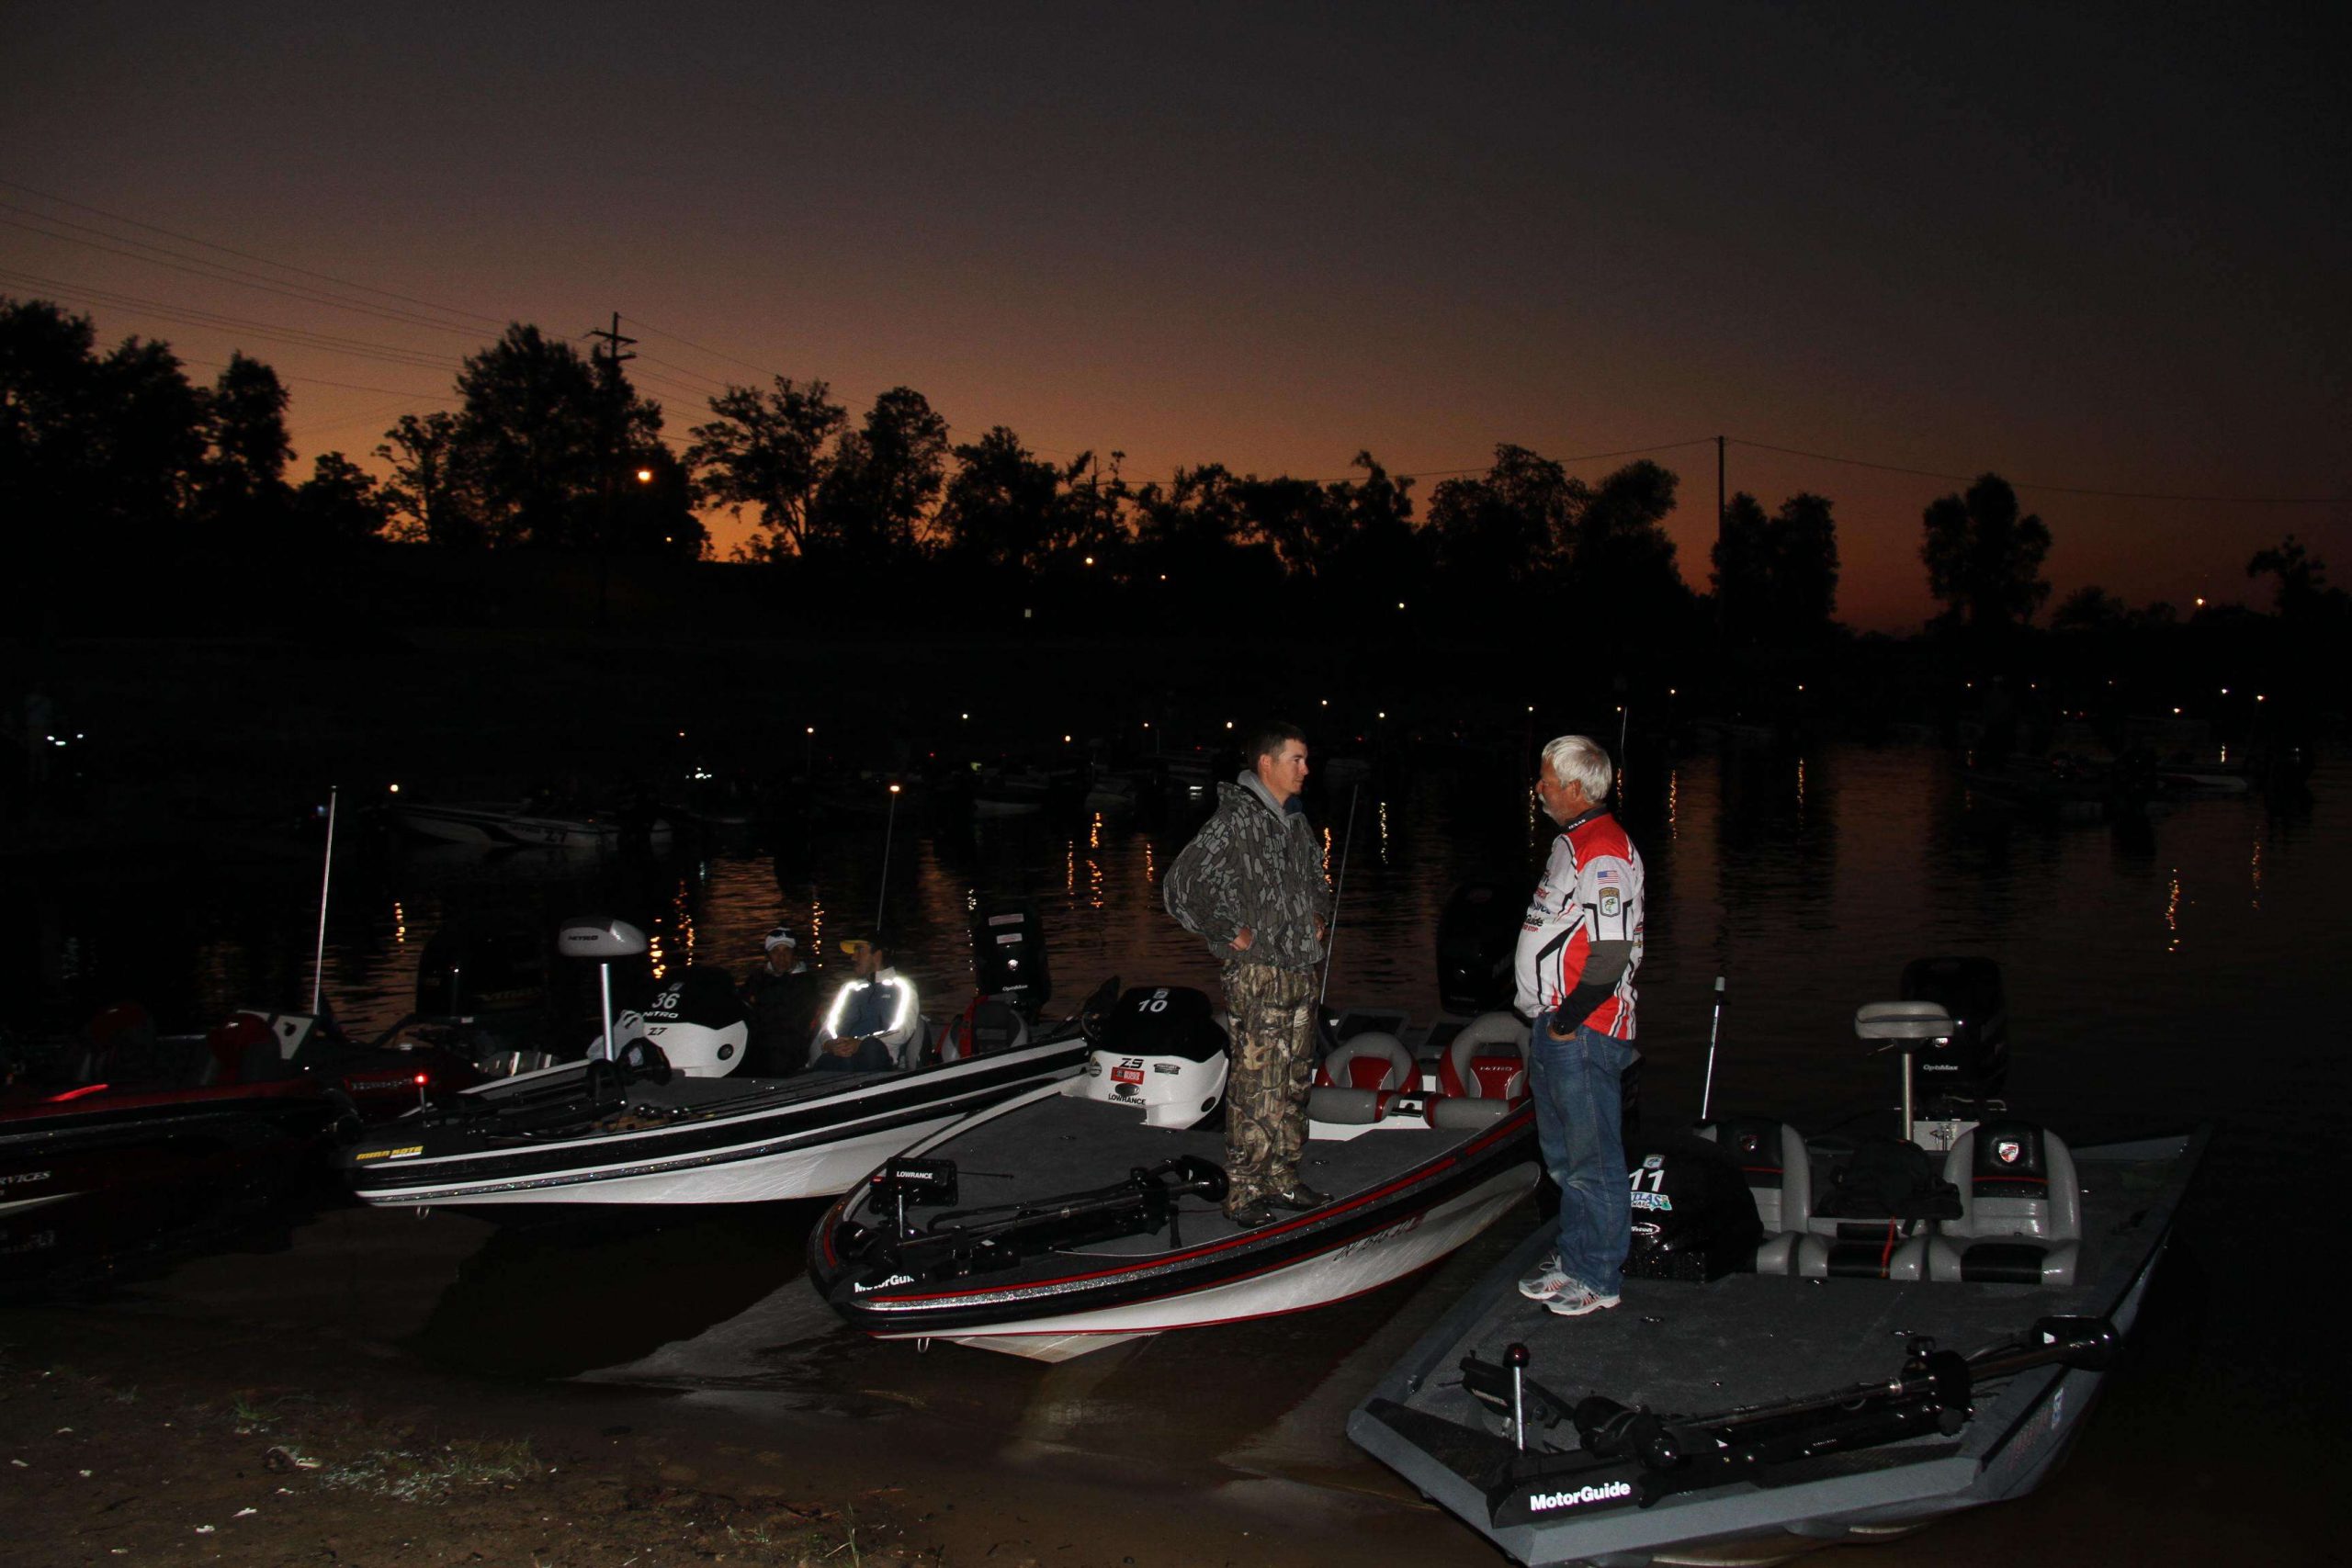 Preston Frazell of Kansas and Albert Collins of Texas get ready to head out onto the Ouachita River.